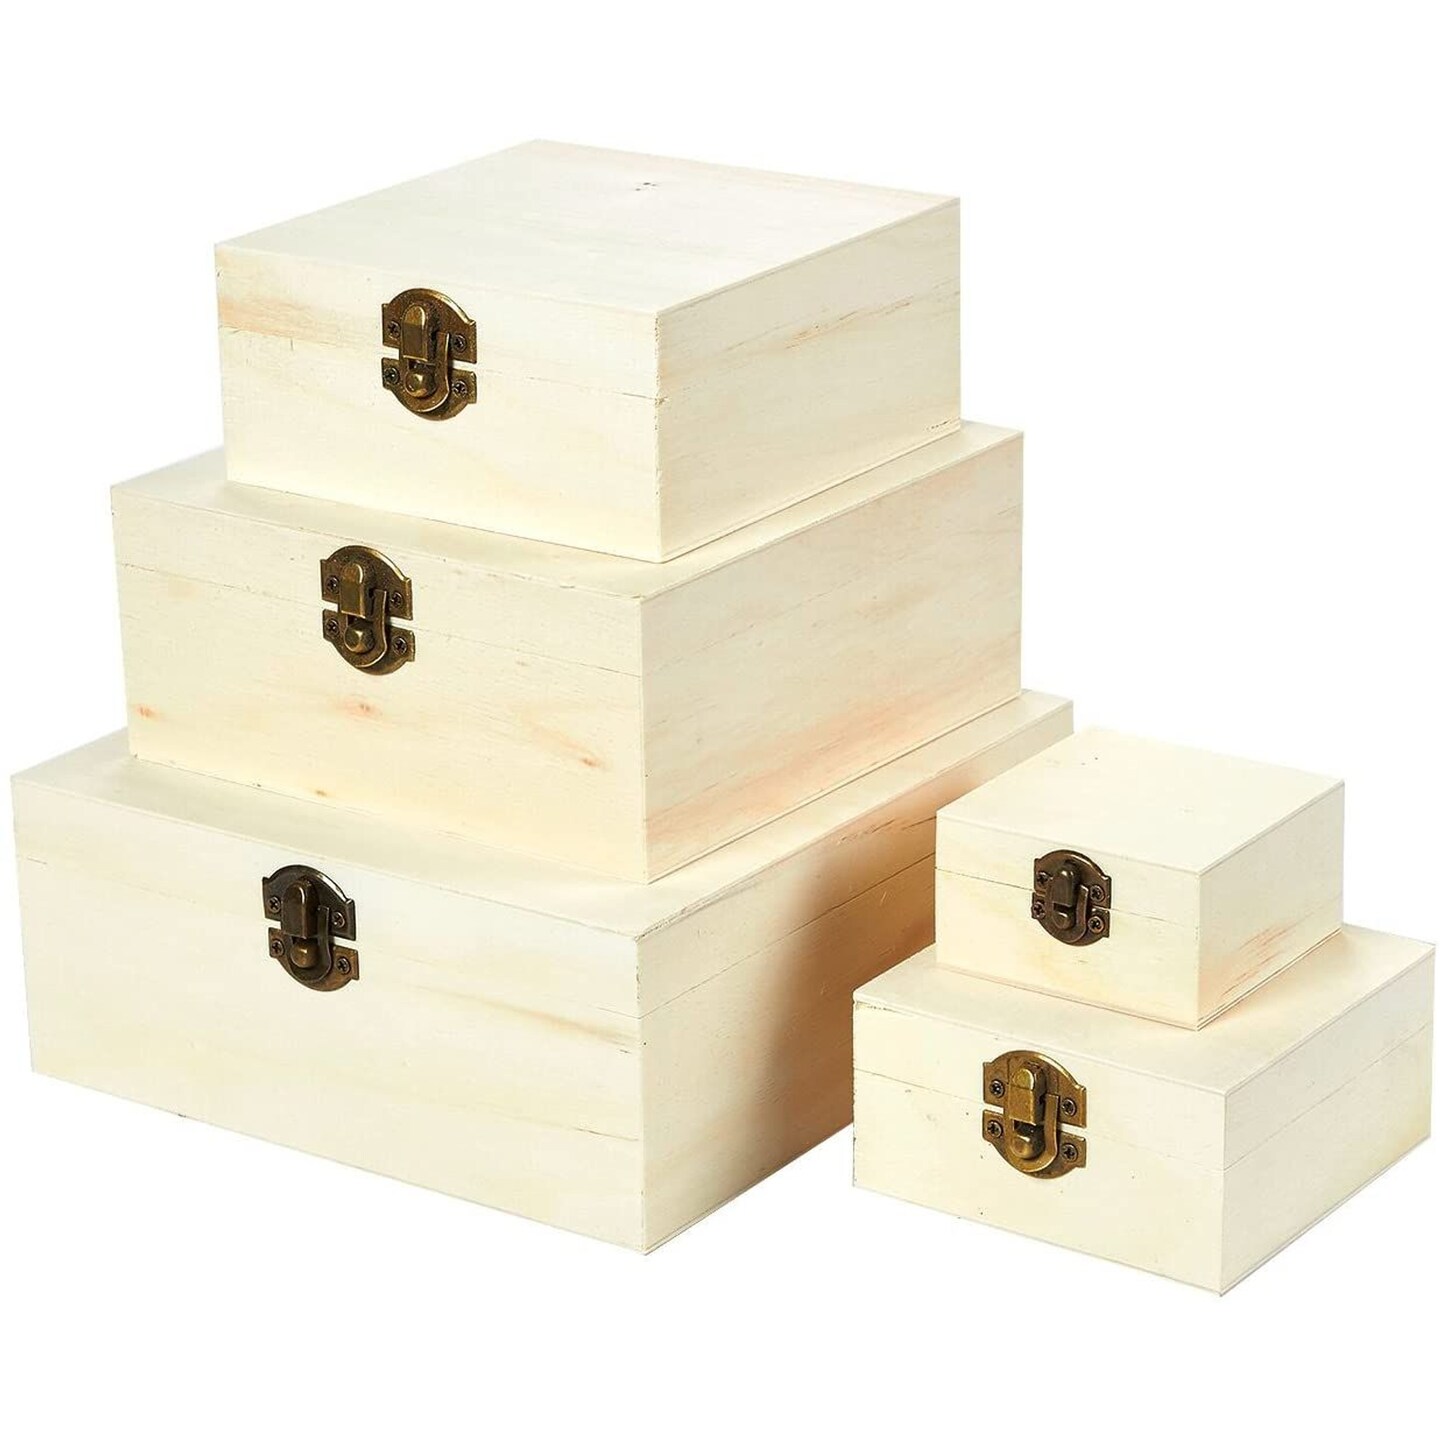 Set of 5 Unfinished Wooden Boxes for Crafts - Wood Nesting Boxes with Hinged Lids for Small Item Storage (5 Sizes)